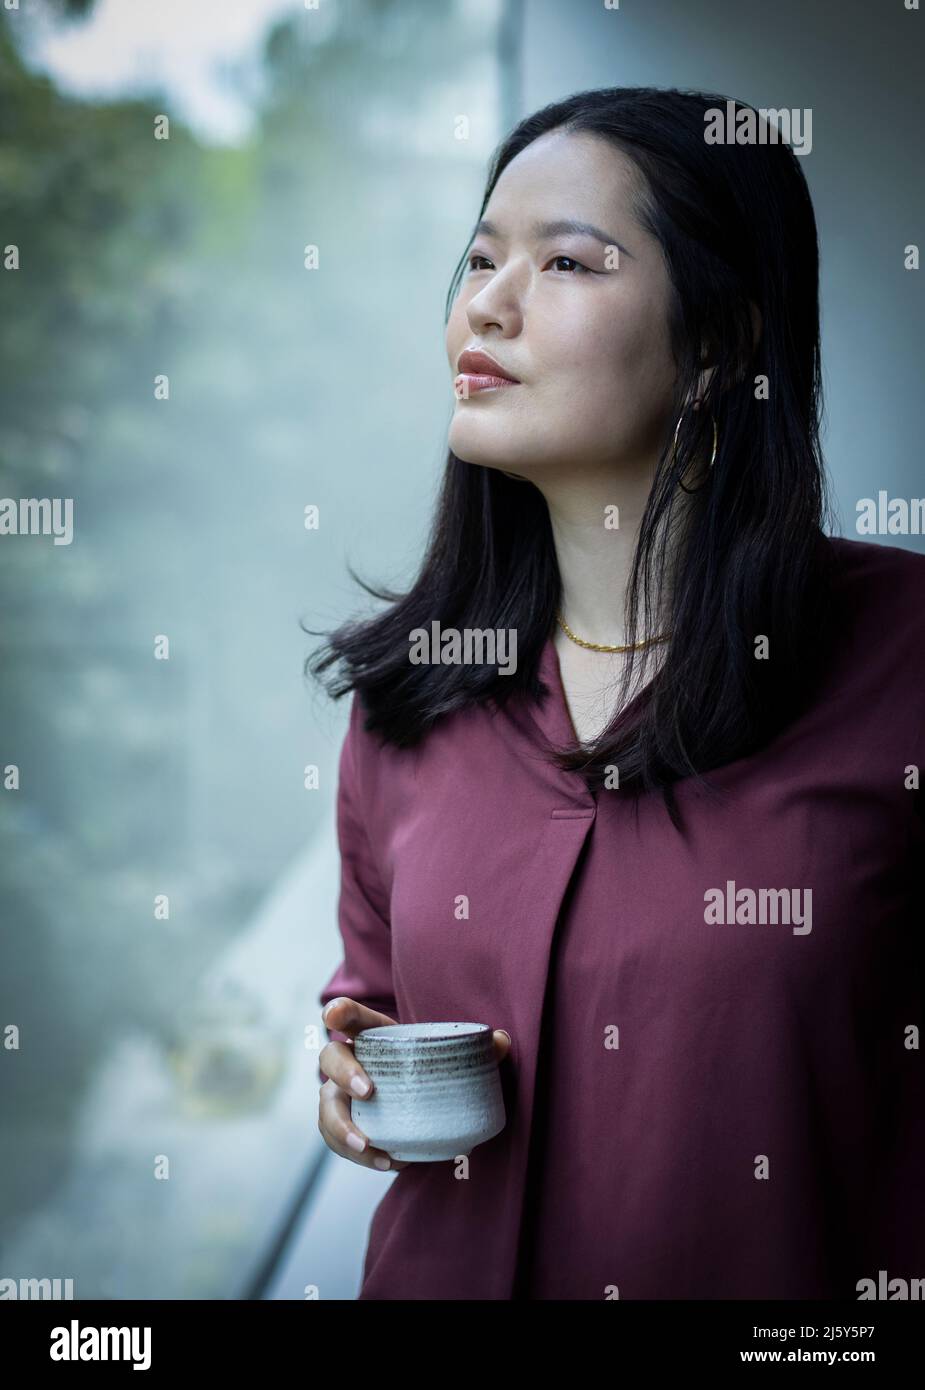 Thoughtful young woman drinking tea at window Stock Photo